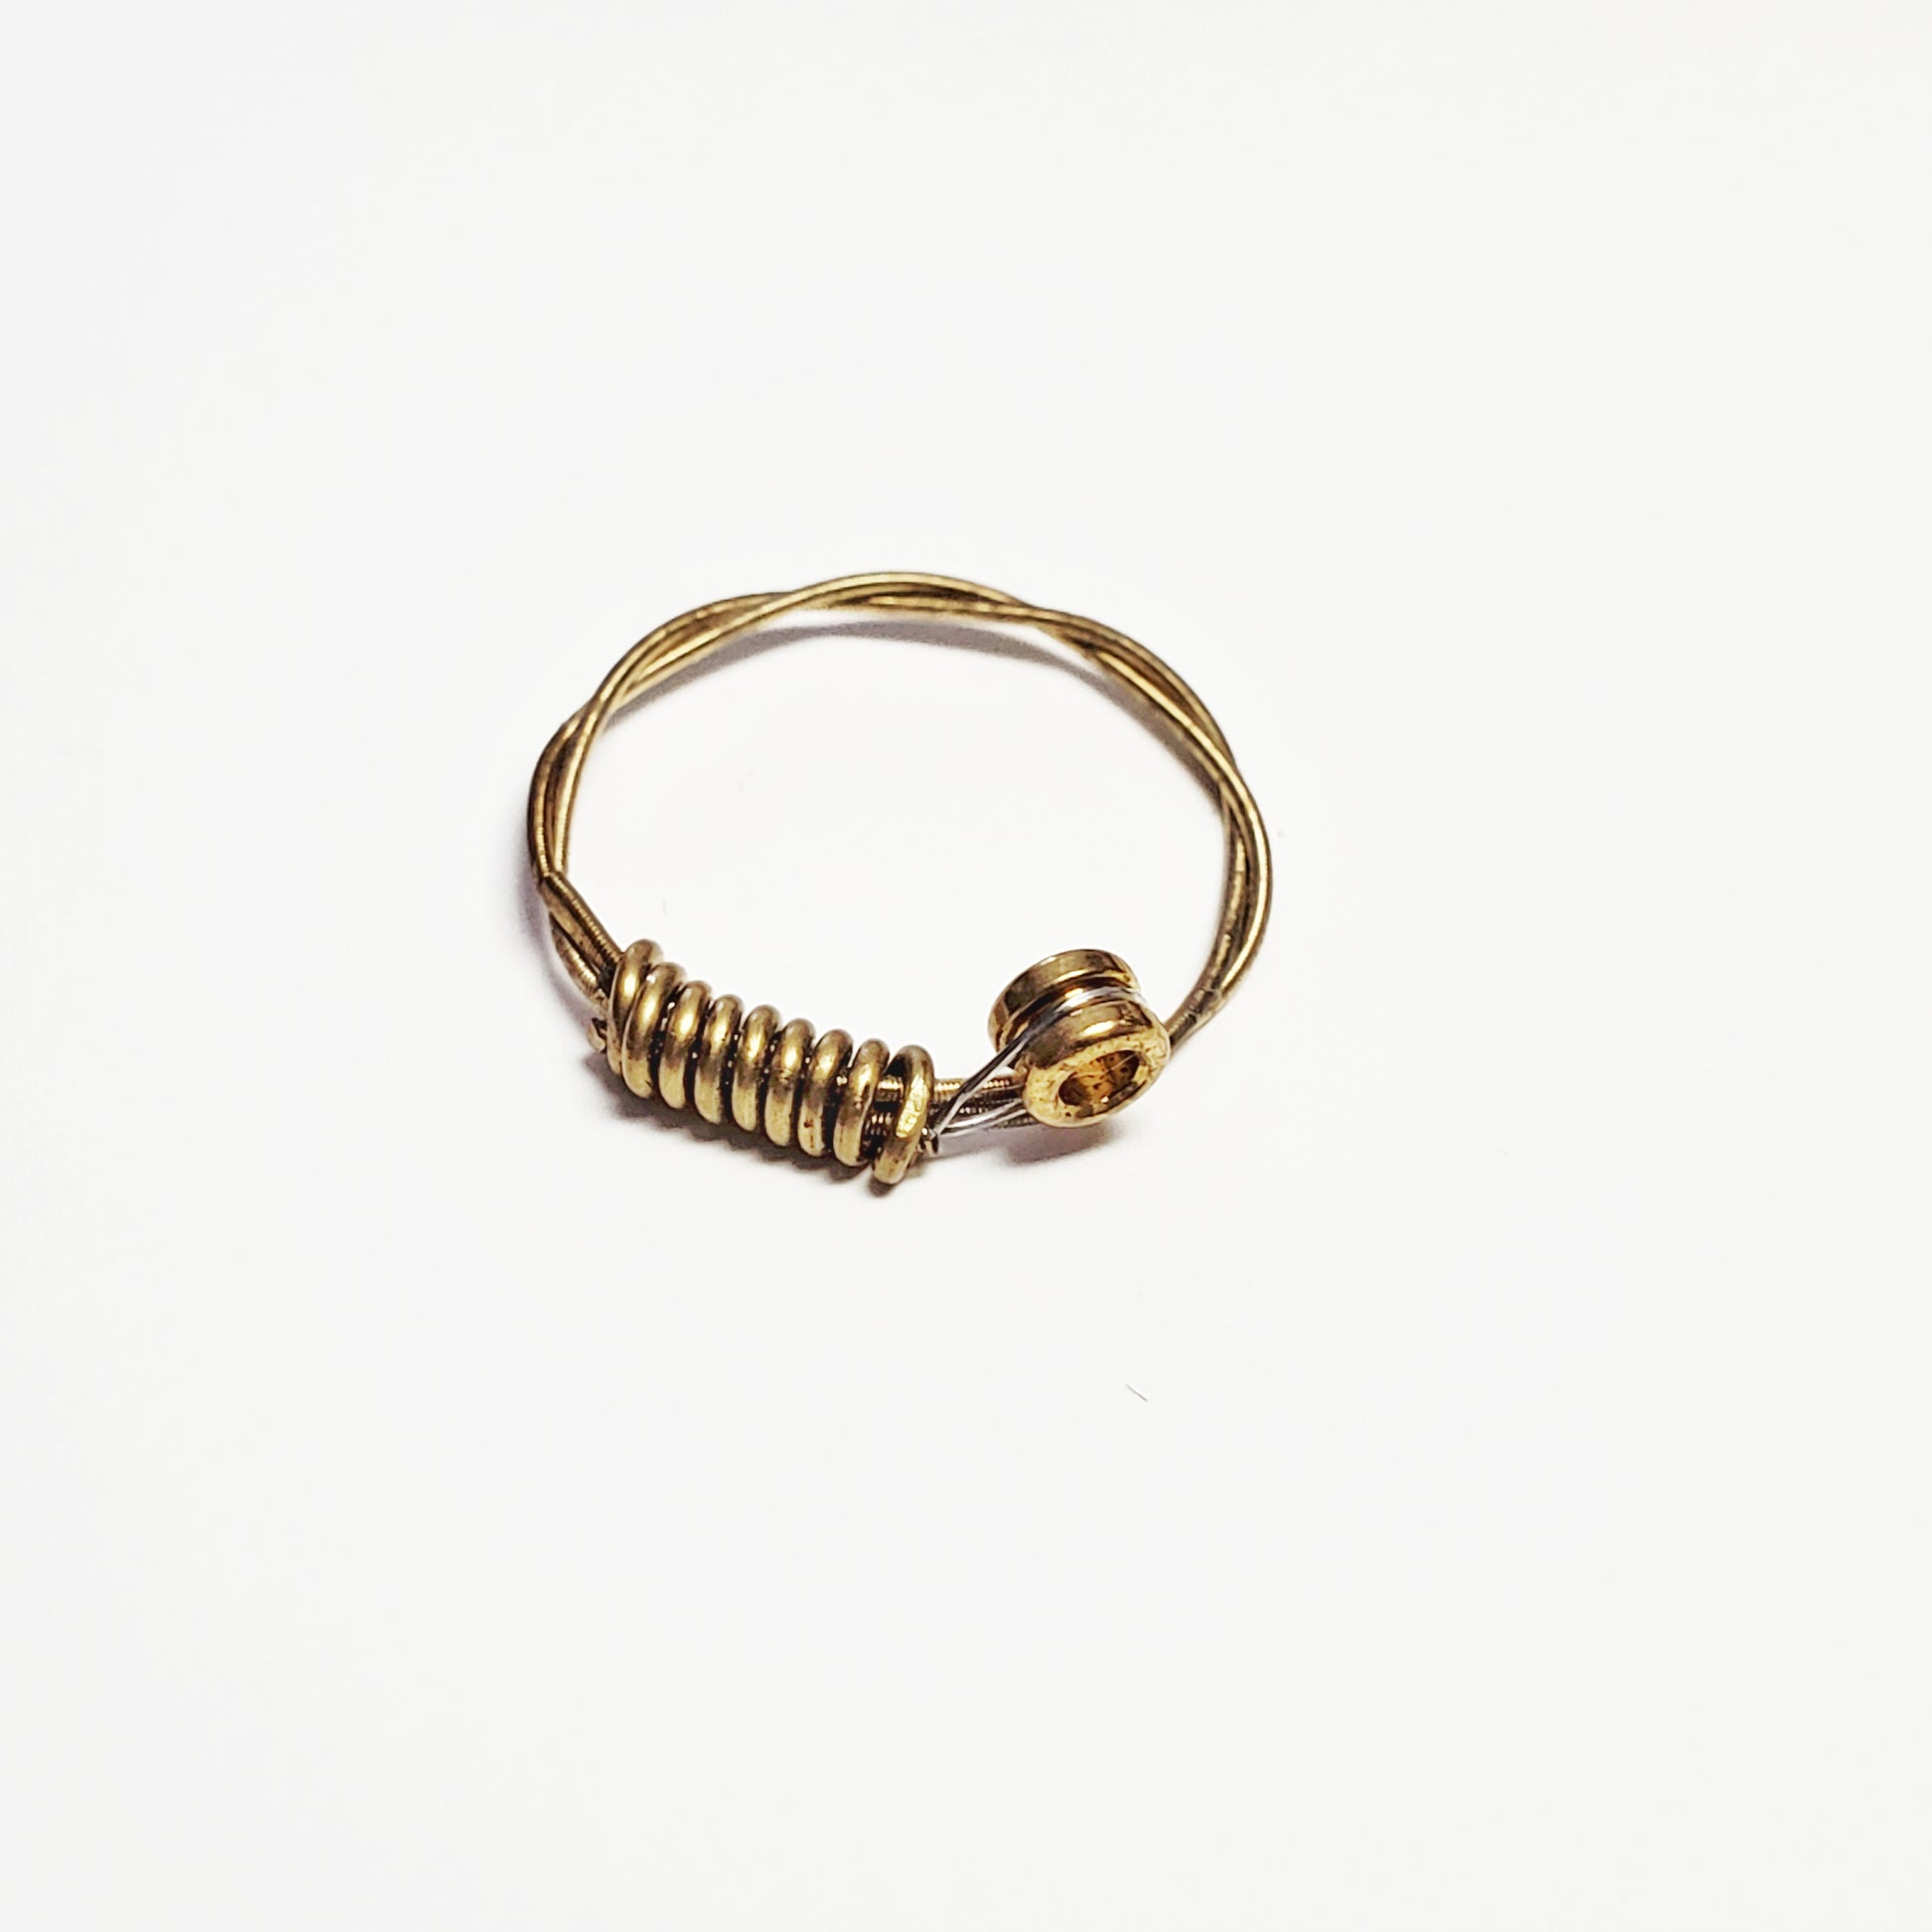 a gold coloured guitar string ring - white background